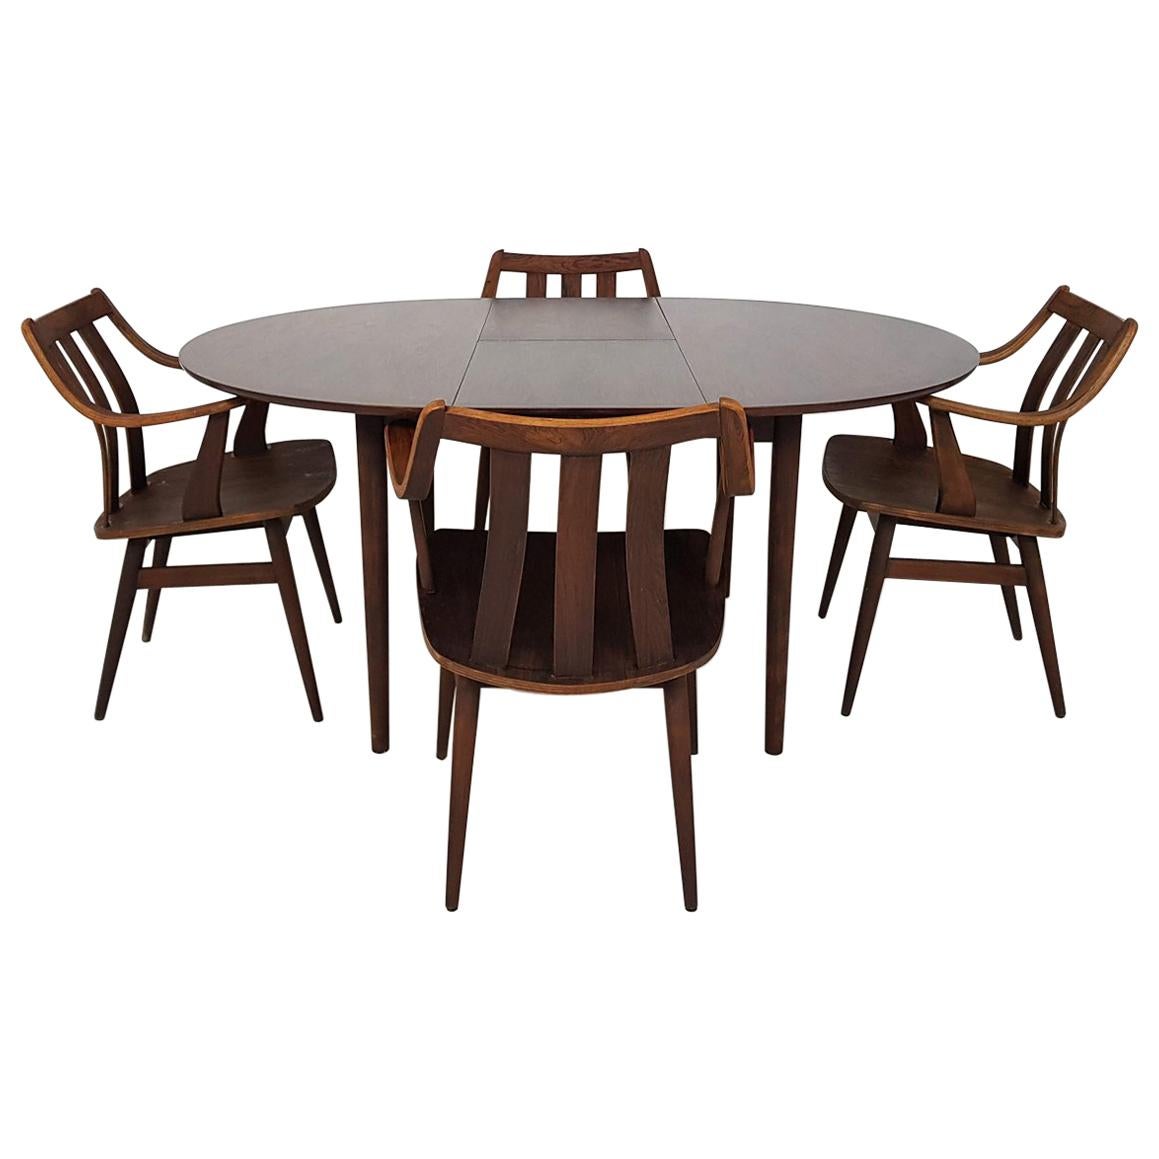 Rosewood Mid-Century Modern Set of Dining Table and Chairs, Dutch Design 1960s